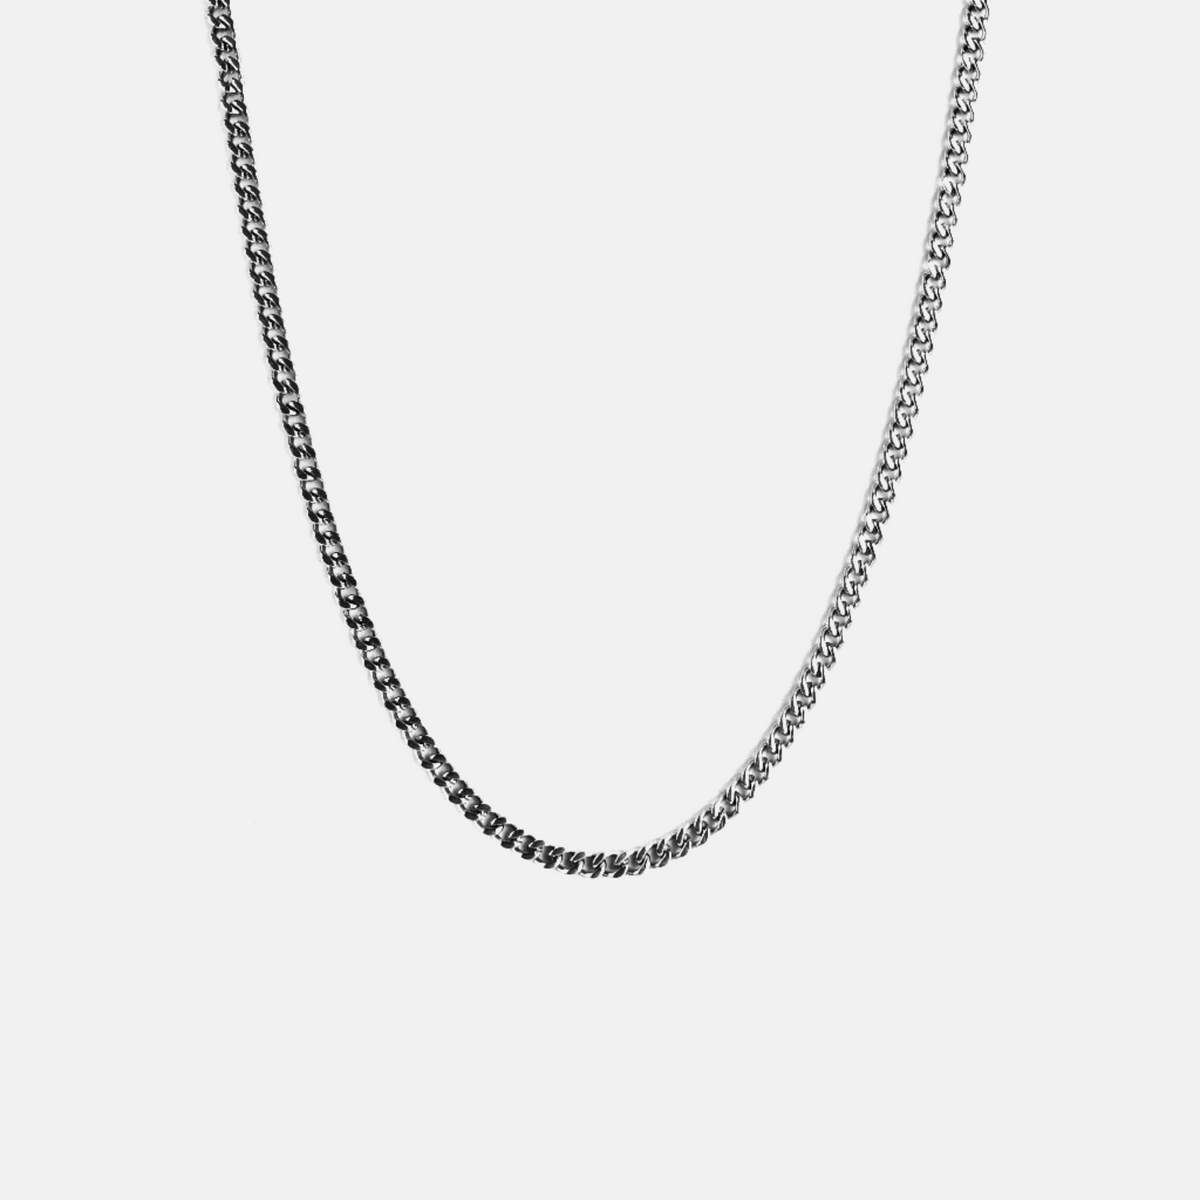 3MM MIAMI CUBAN CHAIN [WHITE | YELLOW] GOLD - ICED DRIP JEWELRY 